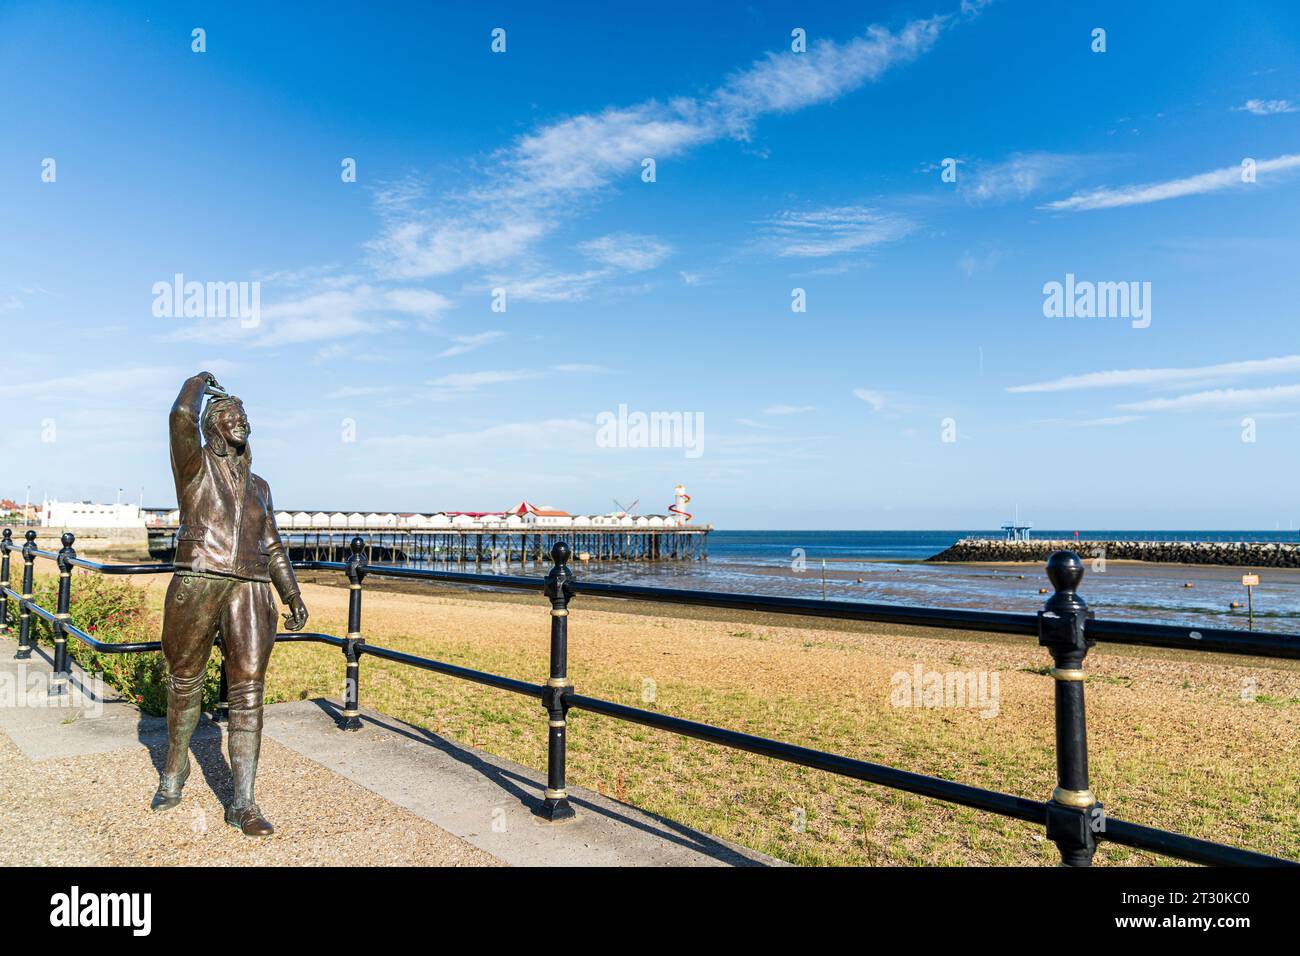 Amy Johnson statue created by Stephen Melton on Herne Bay seafront. Wearing circa 1940's flying costume. Herne Bay pier in the background. Blue sky. Stock Photo